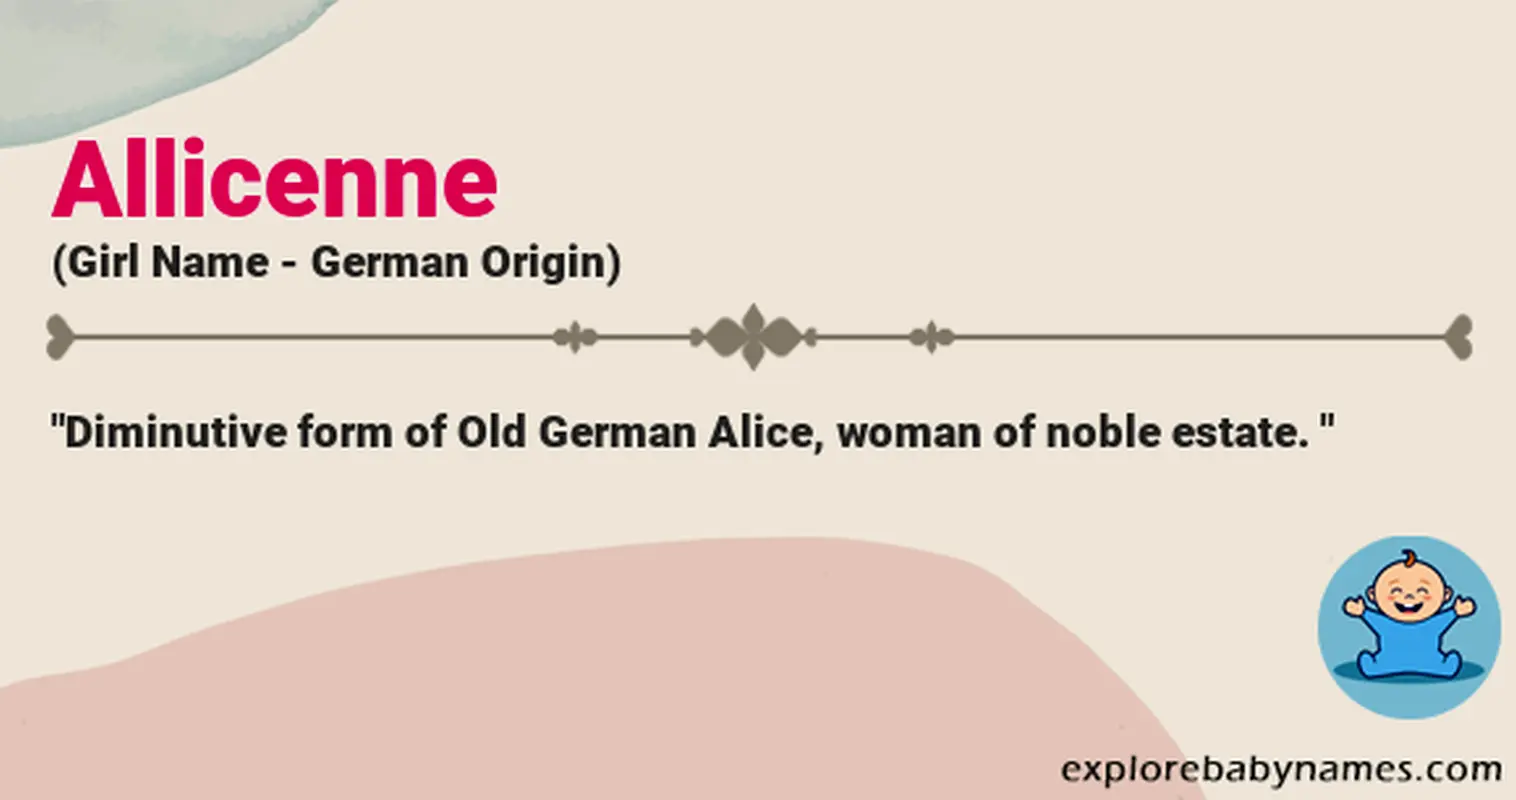 Meaning of Allicenne